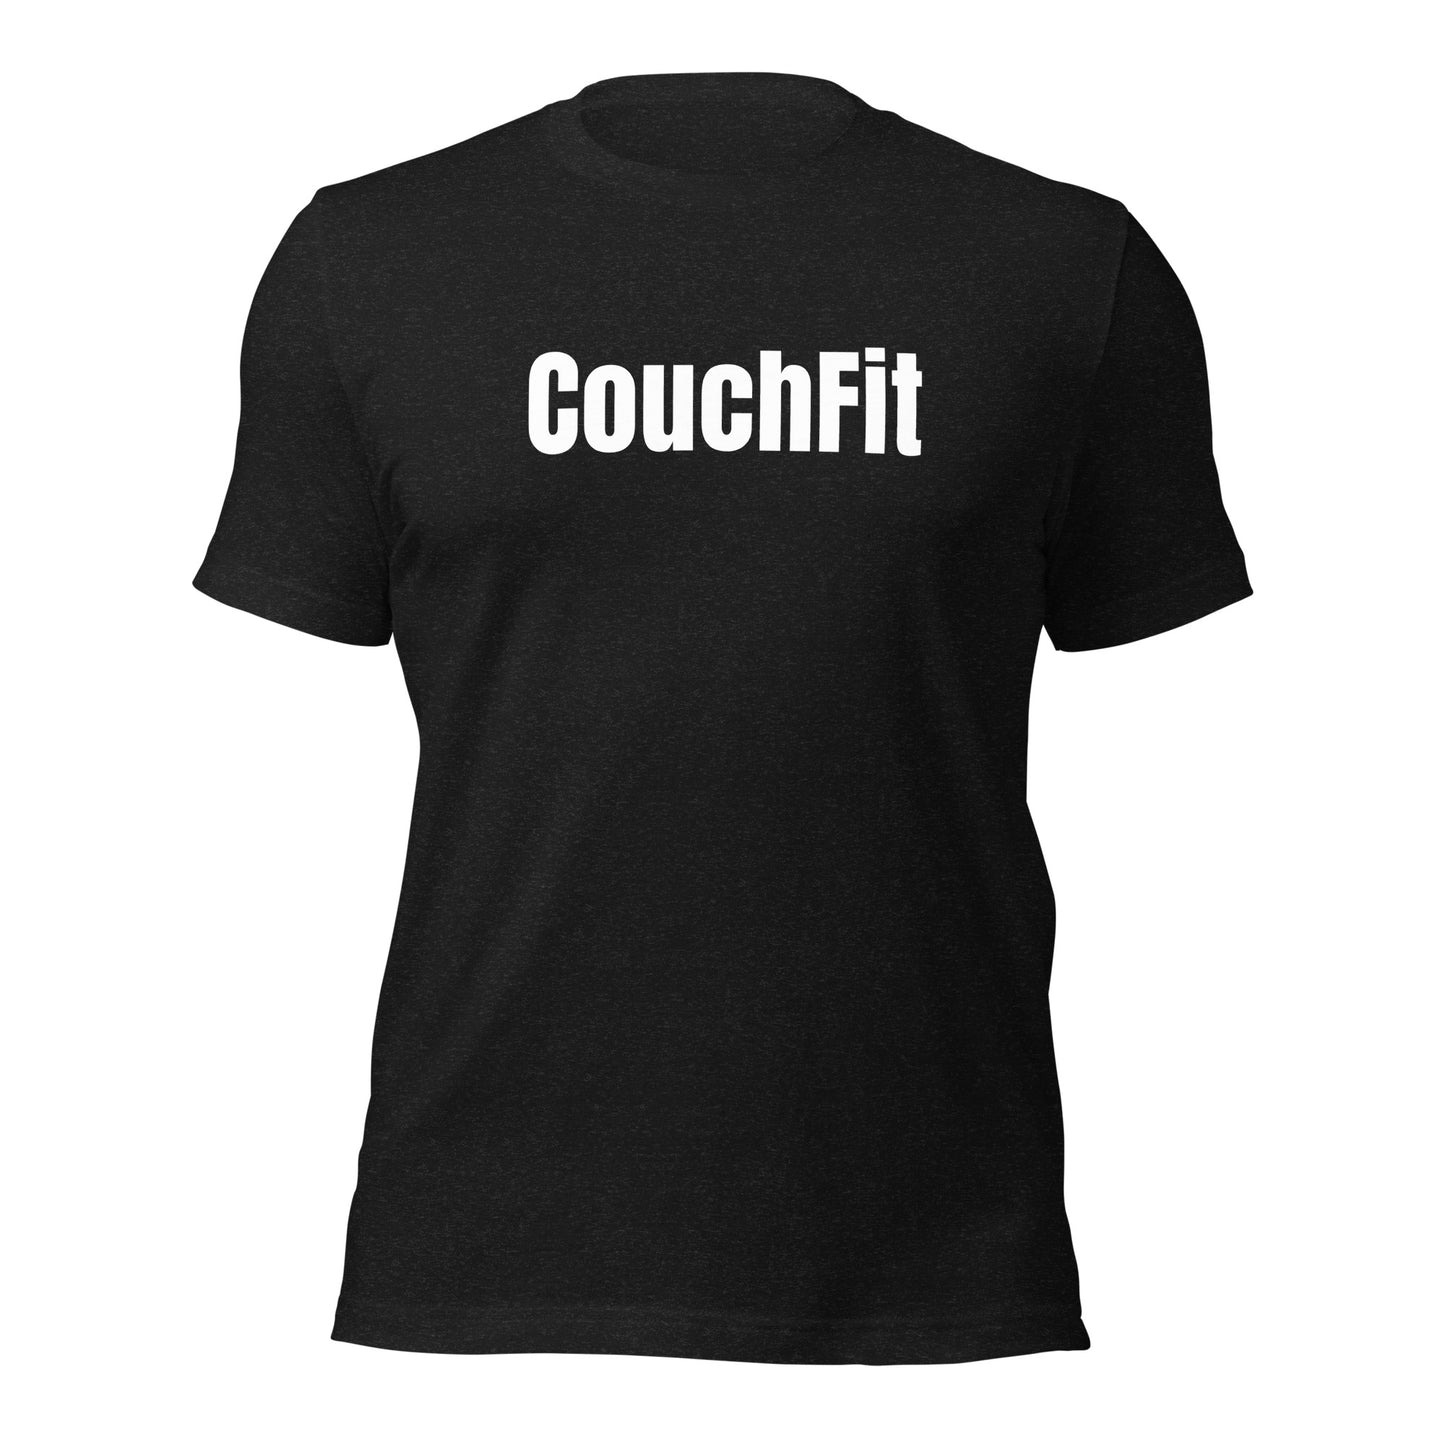 CouchFit Crossfit Shirt, Crossfit Workout Shirt, Crossfit Gifts, Crossfit Coach Gift, Unisex